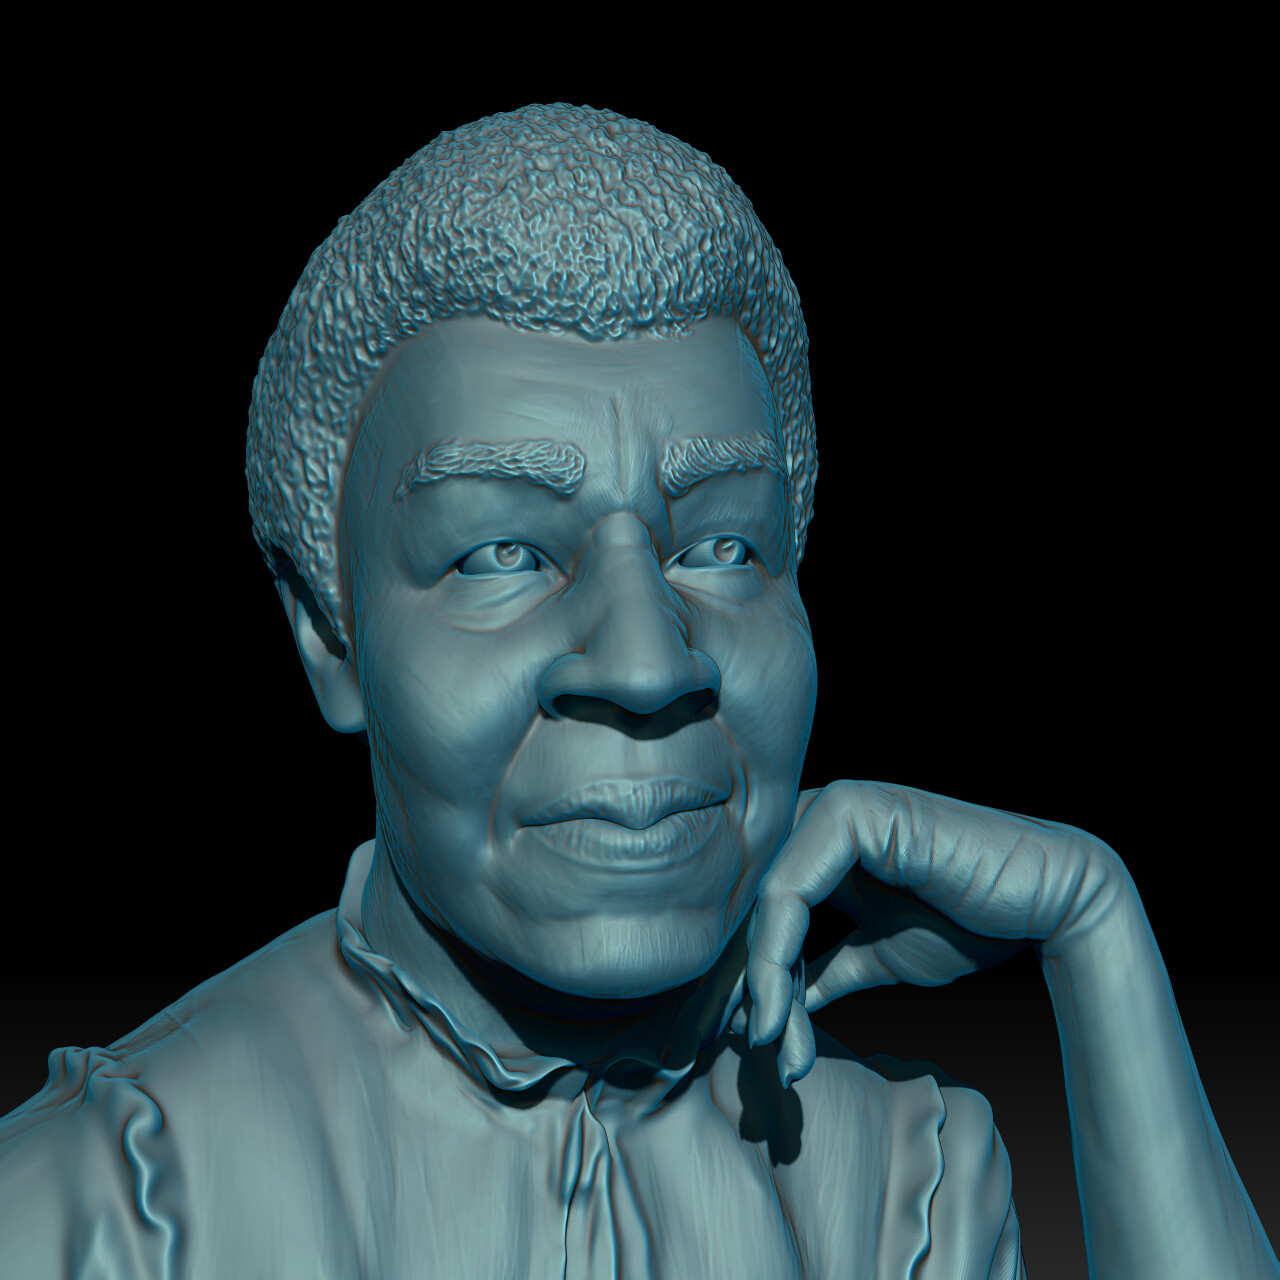 the 3D portrait I sculpted for the Bas Relief